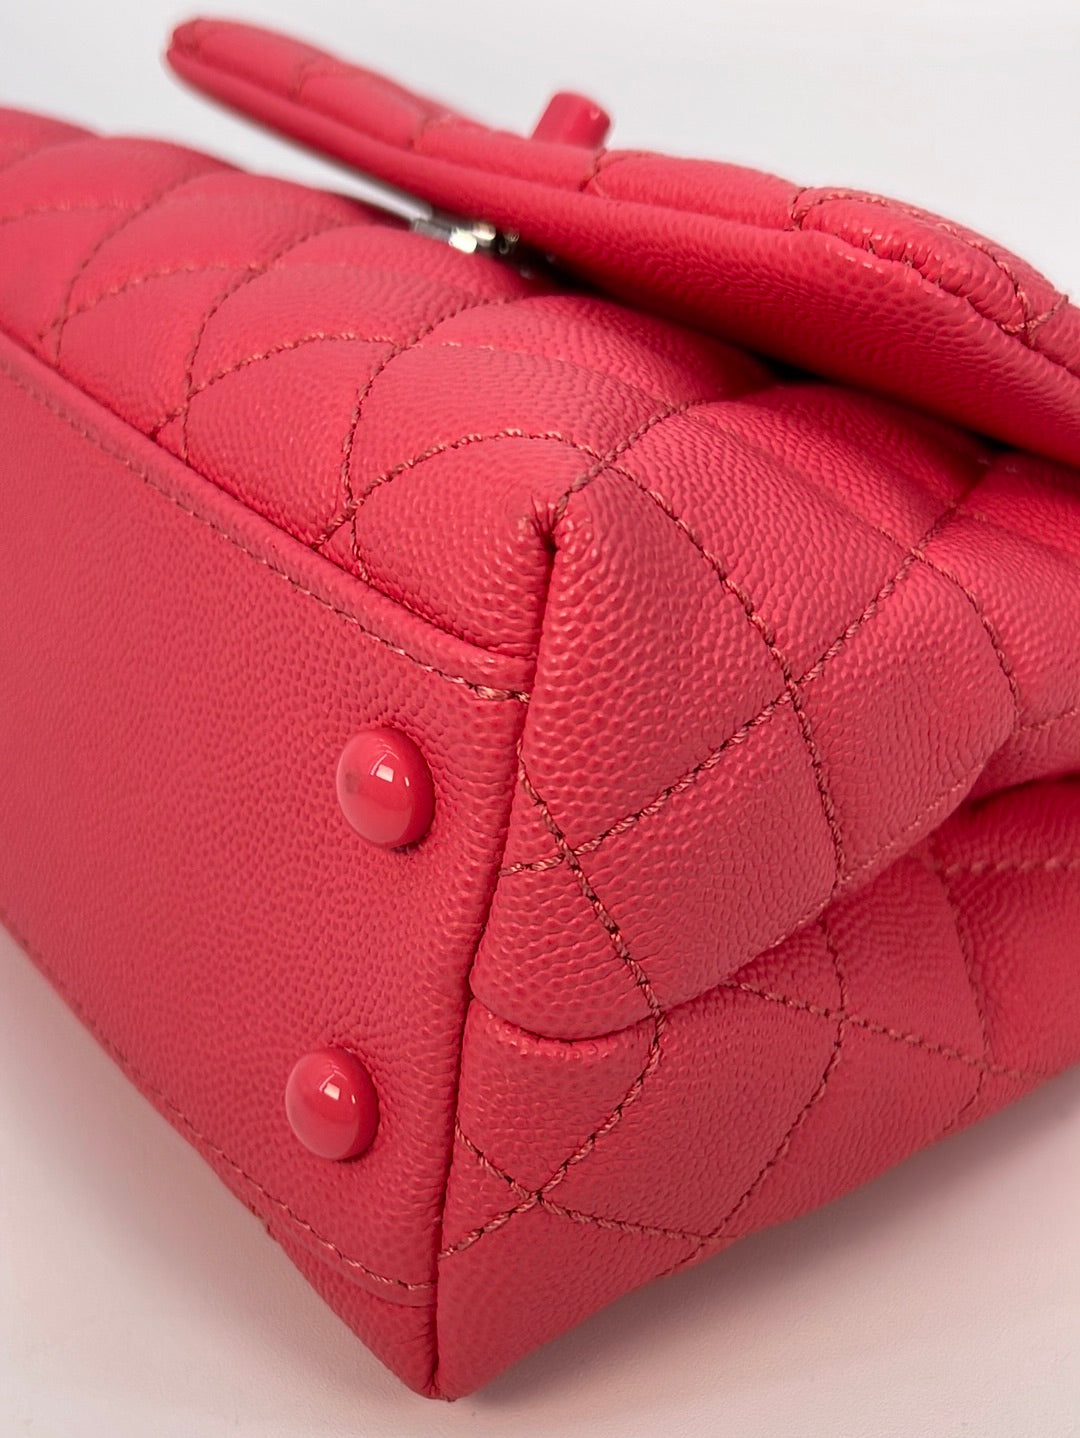 CHANEL Classic Quilted Flap Pink Caviar Shoulder Bag/Clutch with Chain  StrapPreloved Lux Canada